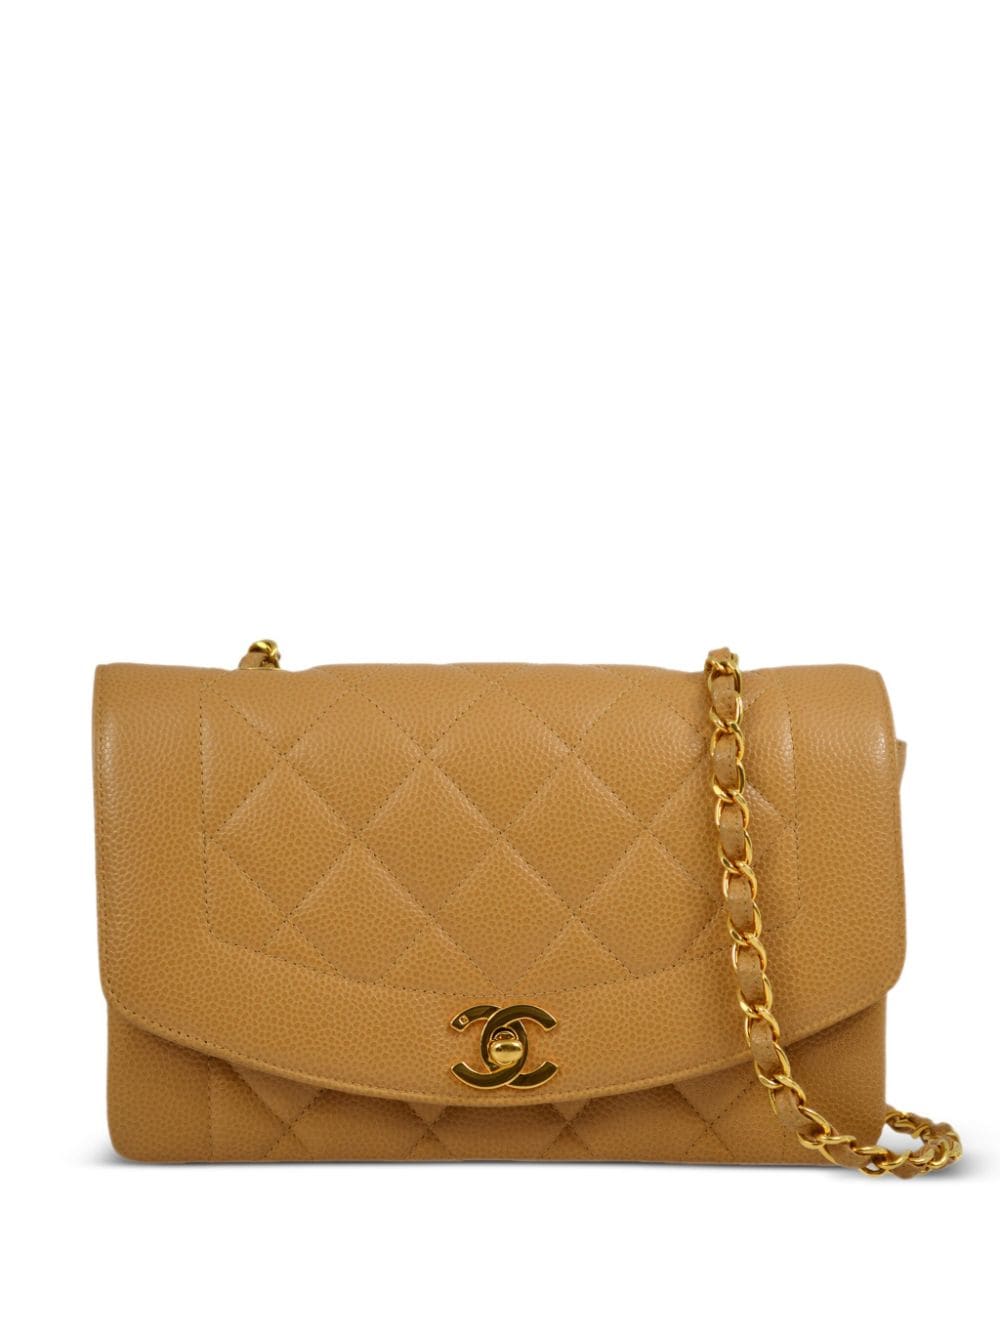 Pre-owned Chanel 1992 Small Diana Shoulder Bag In Neutrals